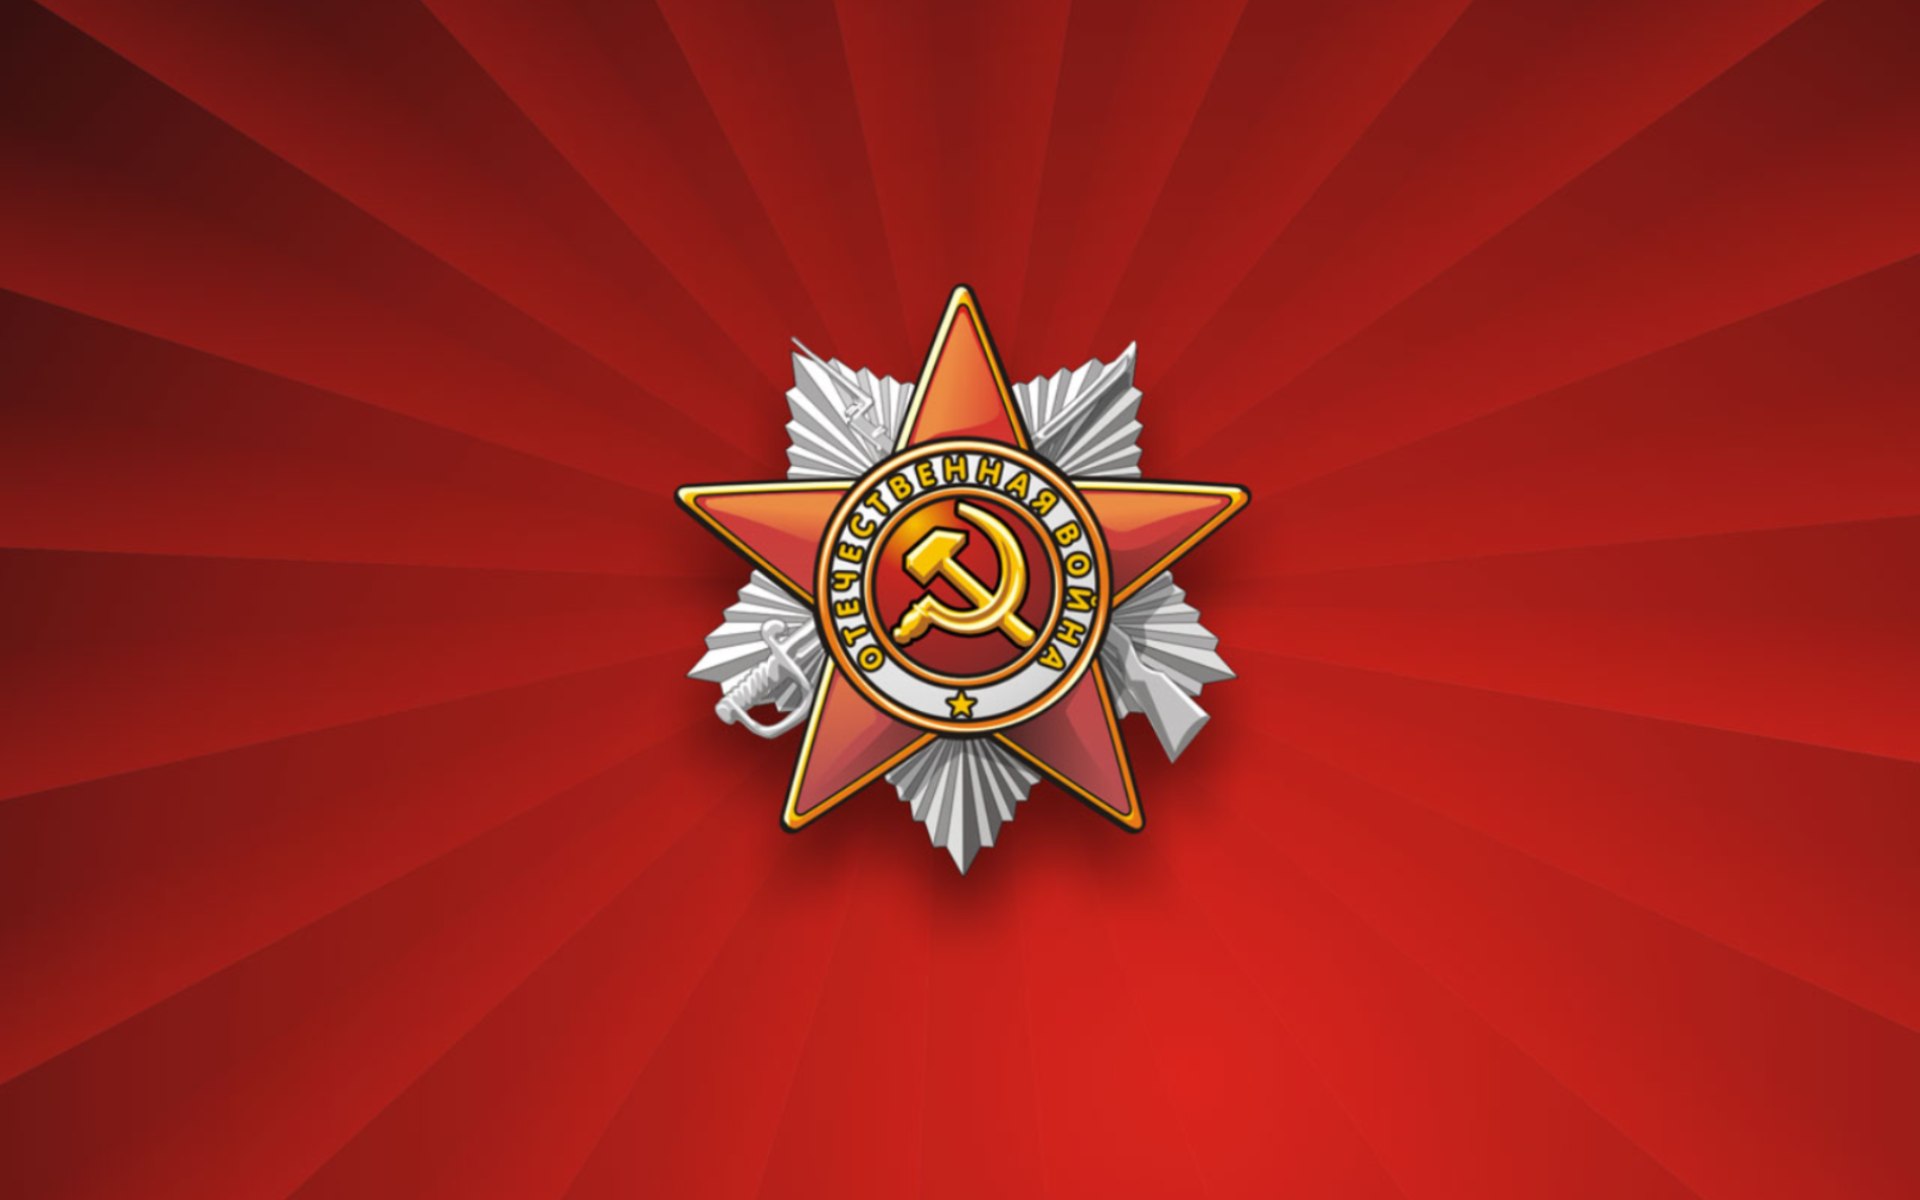 Hammer And Sickle Wallpaper